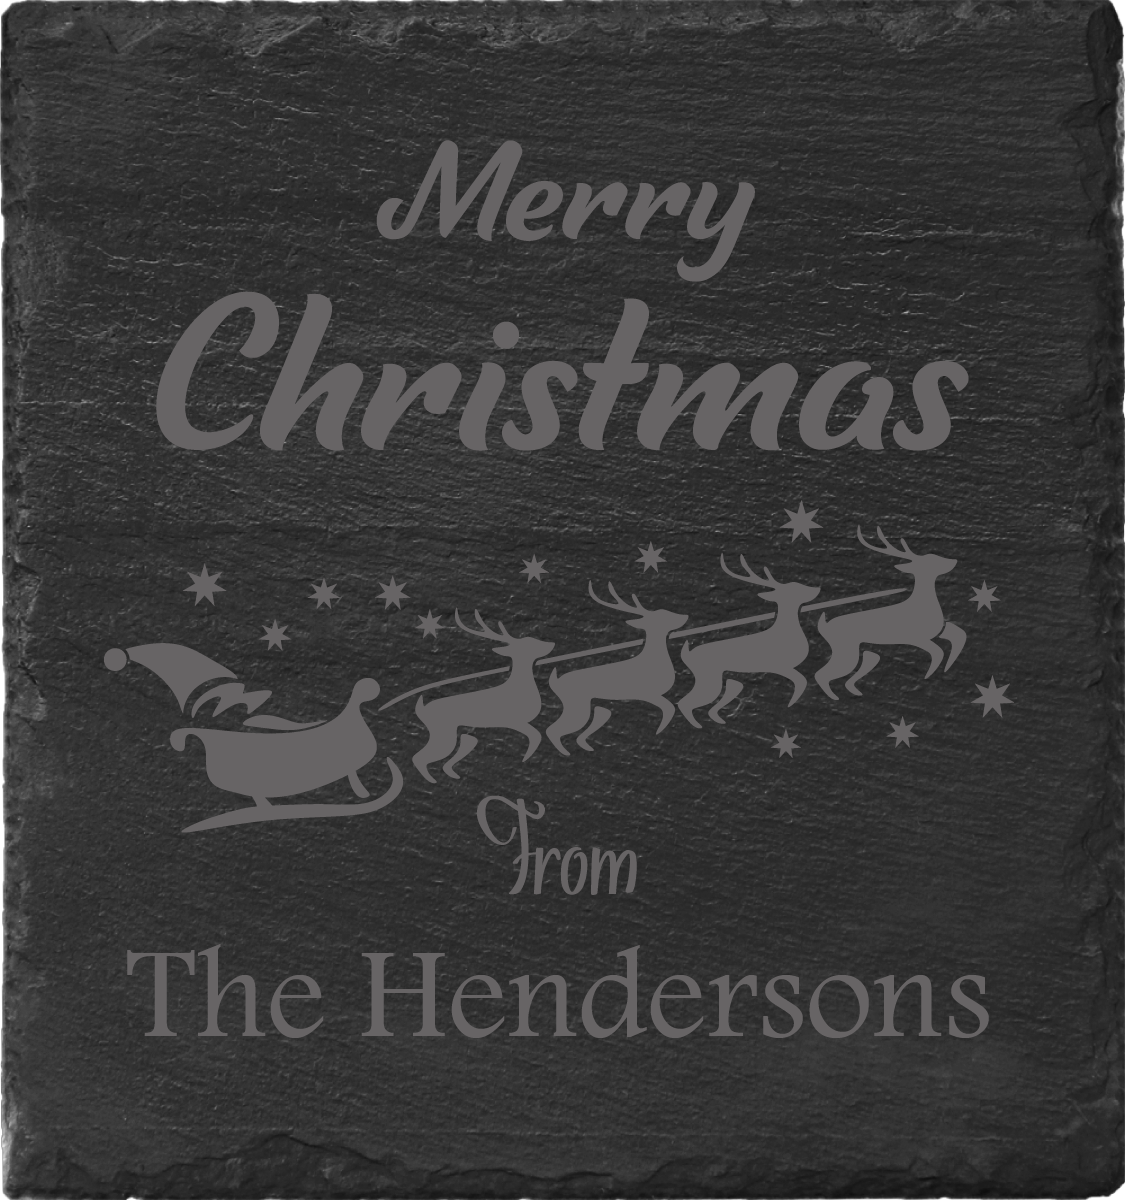 Personalize this Merry Christmas Slate Coaster to make a great gift for the holidays. Get a set for entertaining guests or give as a perfect gift.  Buy as a single, or mix and match in sets of 2 or 4.